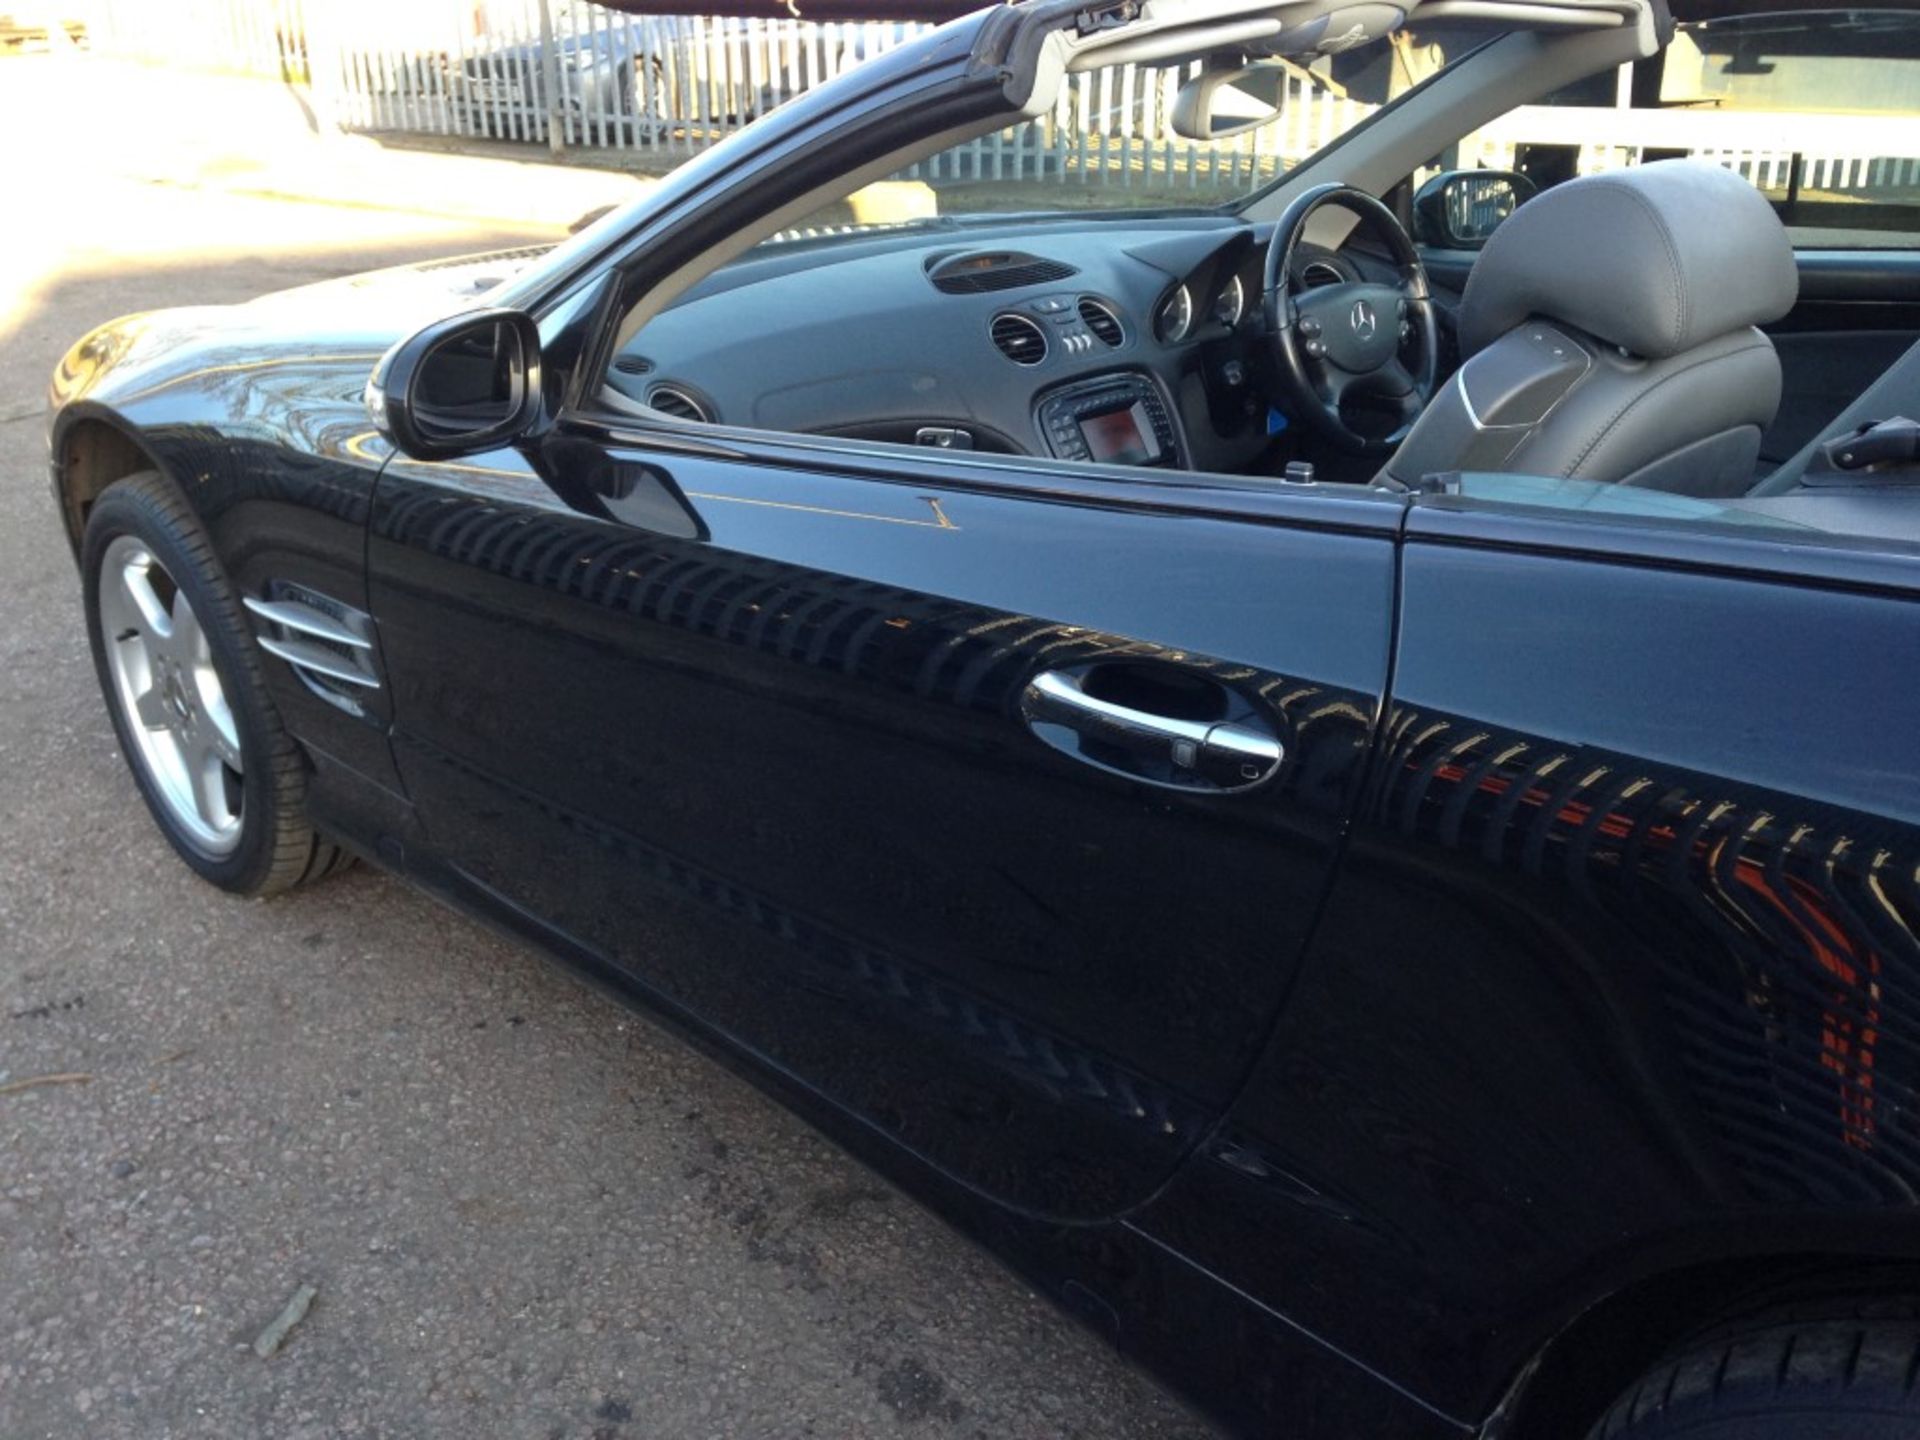 1 x Mercedes SL500 Automatic 5.0 Convertible - Petrol - Year 2002 - 94,500 Miles - Long MOT Expiry - Image 25 of 31